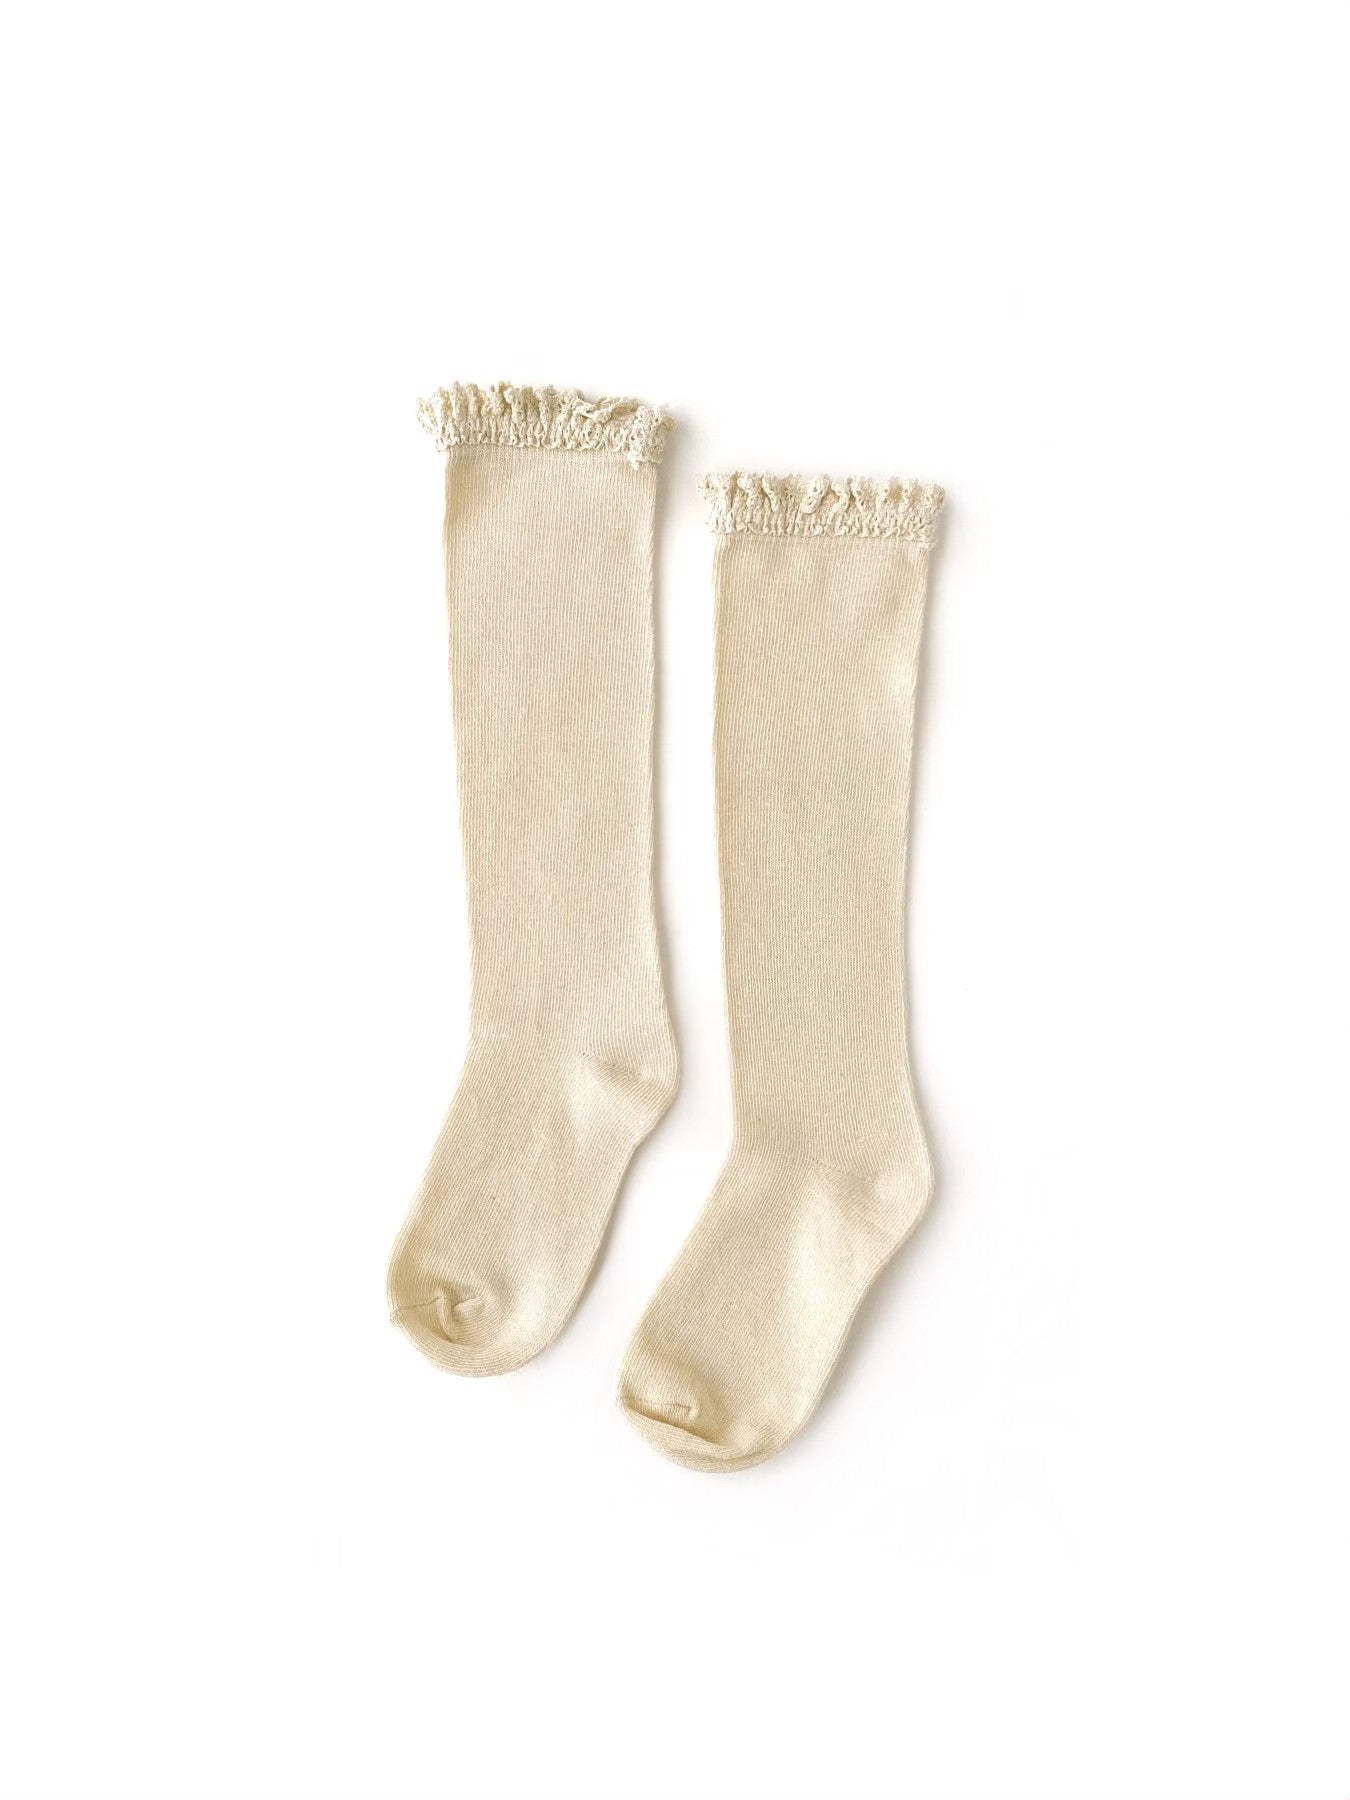 Little Stocking Co. Neutral Lace Top Knee High Socks